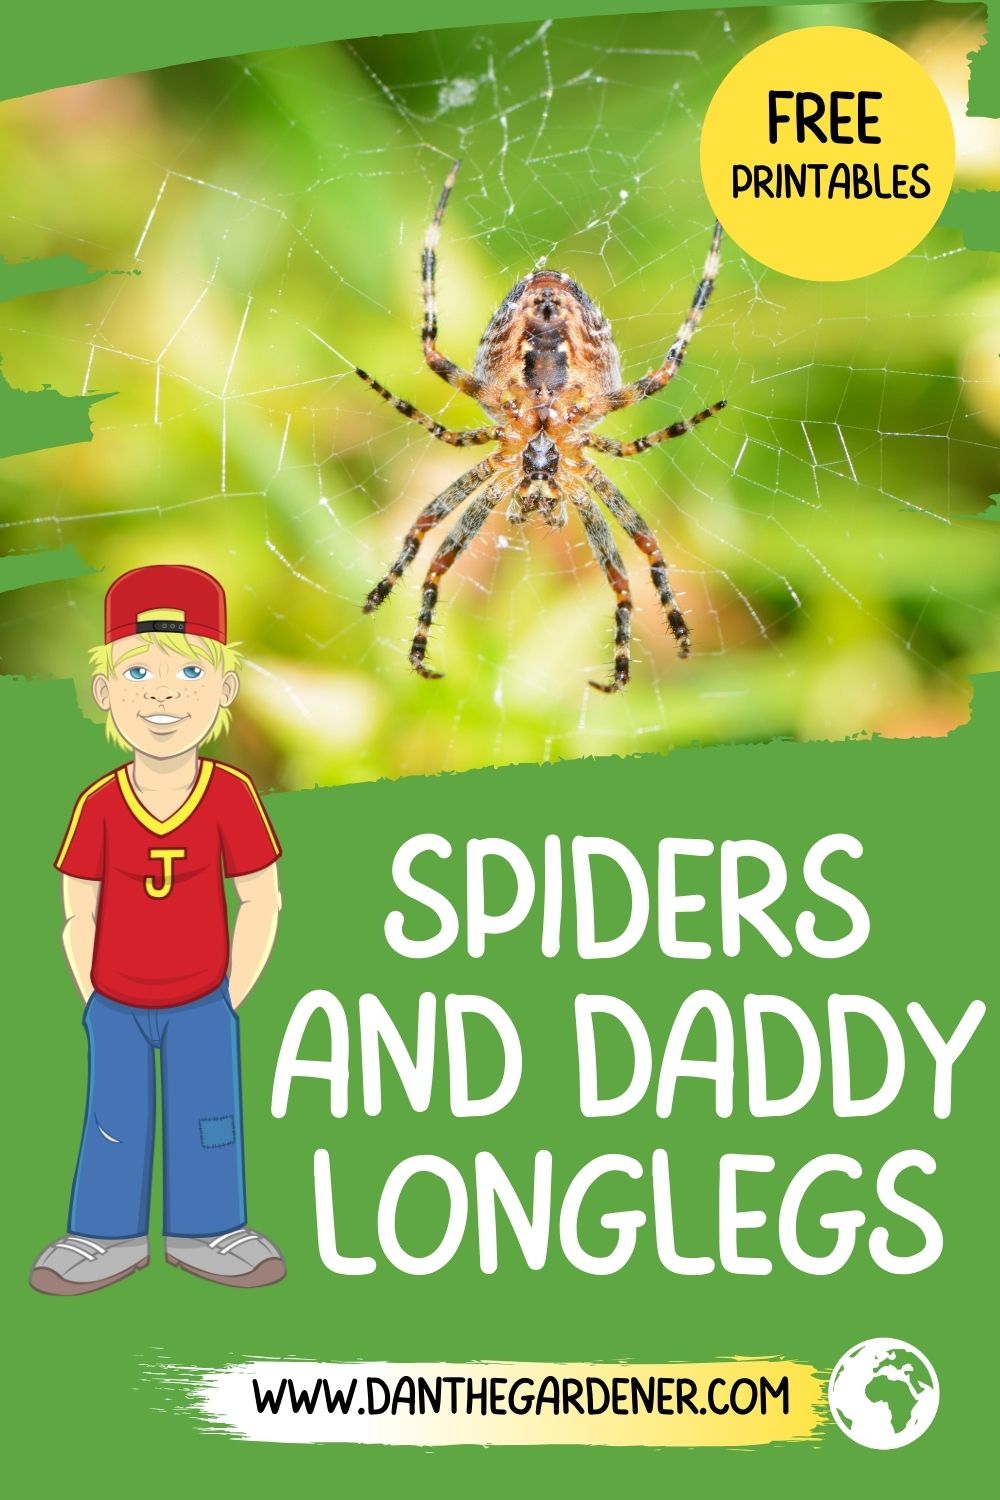 spiders and daddy longlegs.